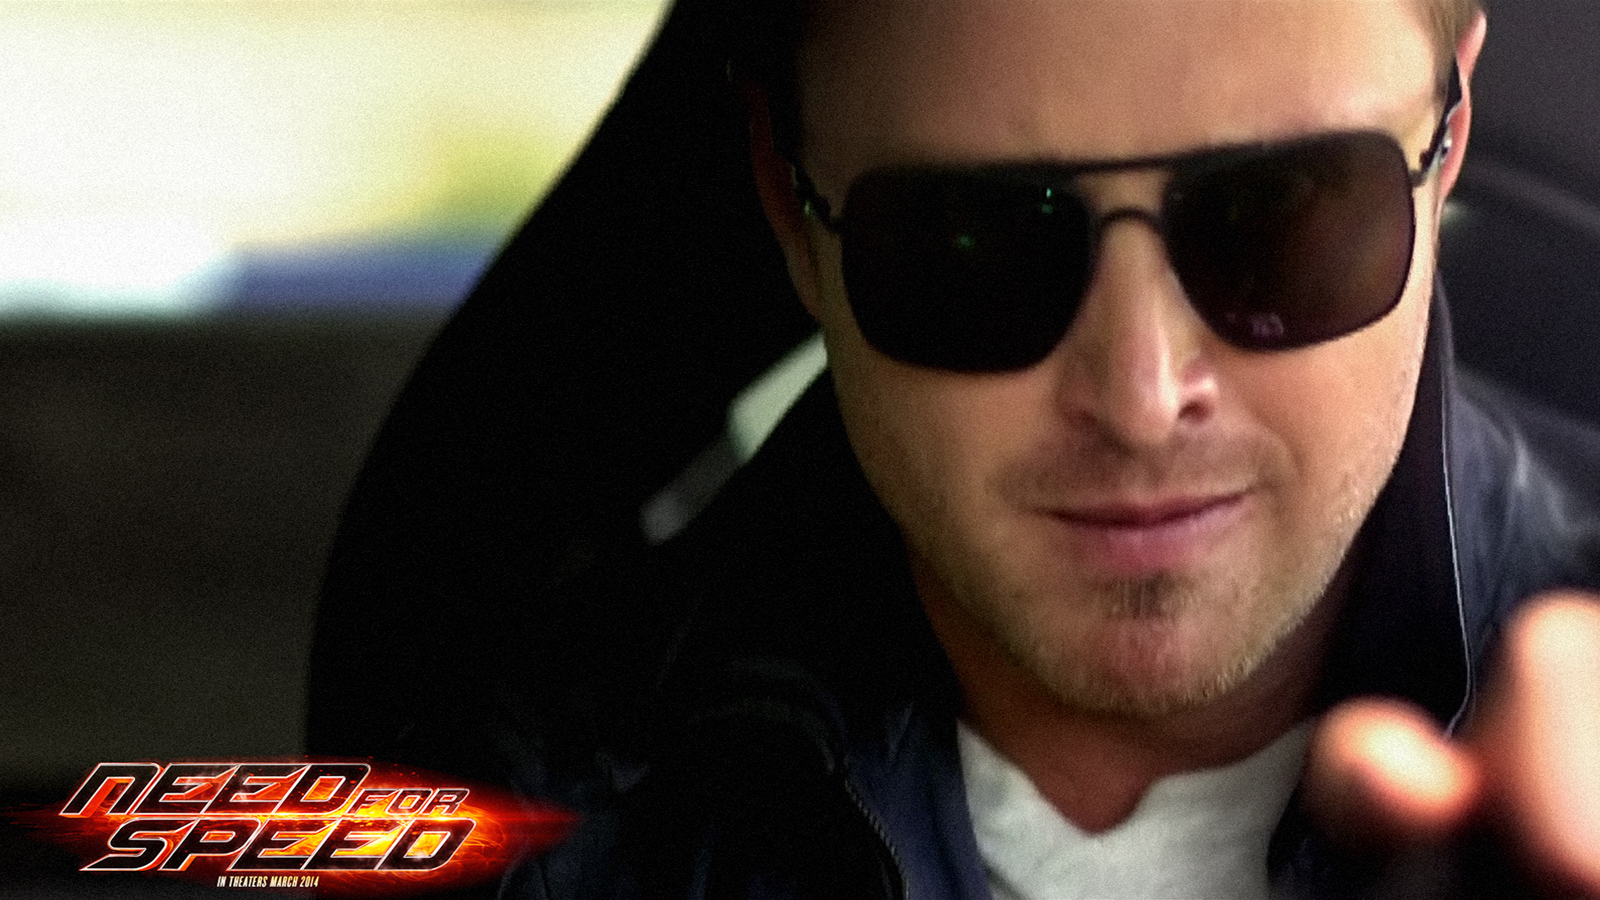 Aaron Paul As Tobey Marshall Need For Speed Movie HD Wallpaper